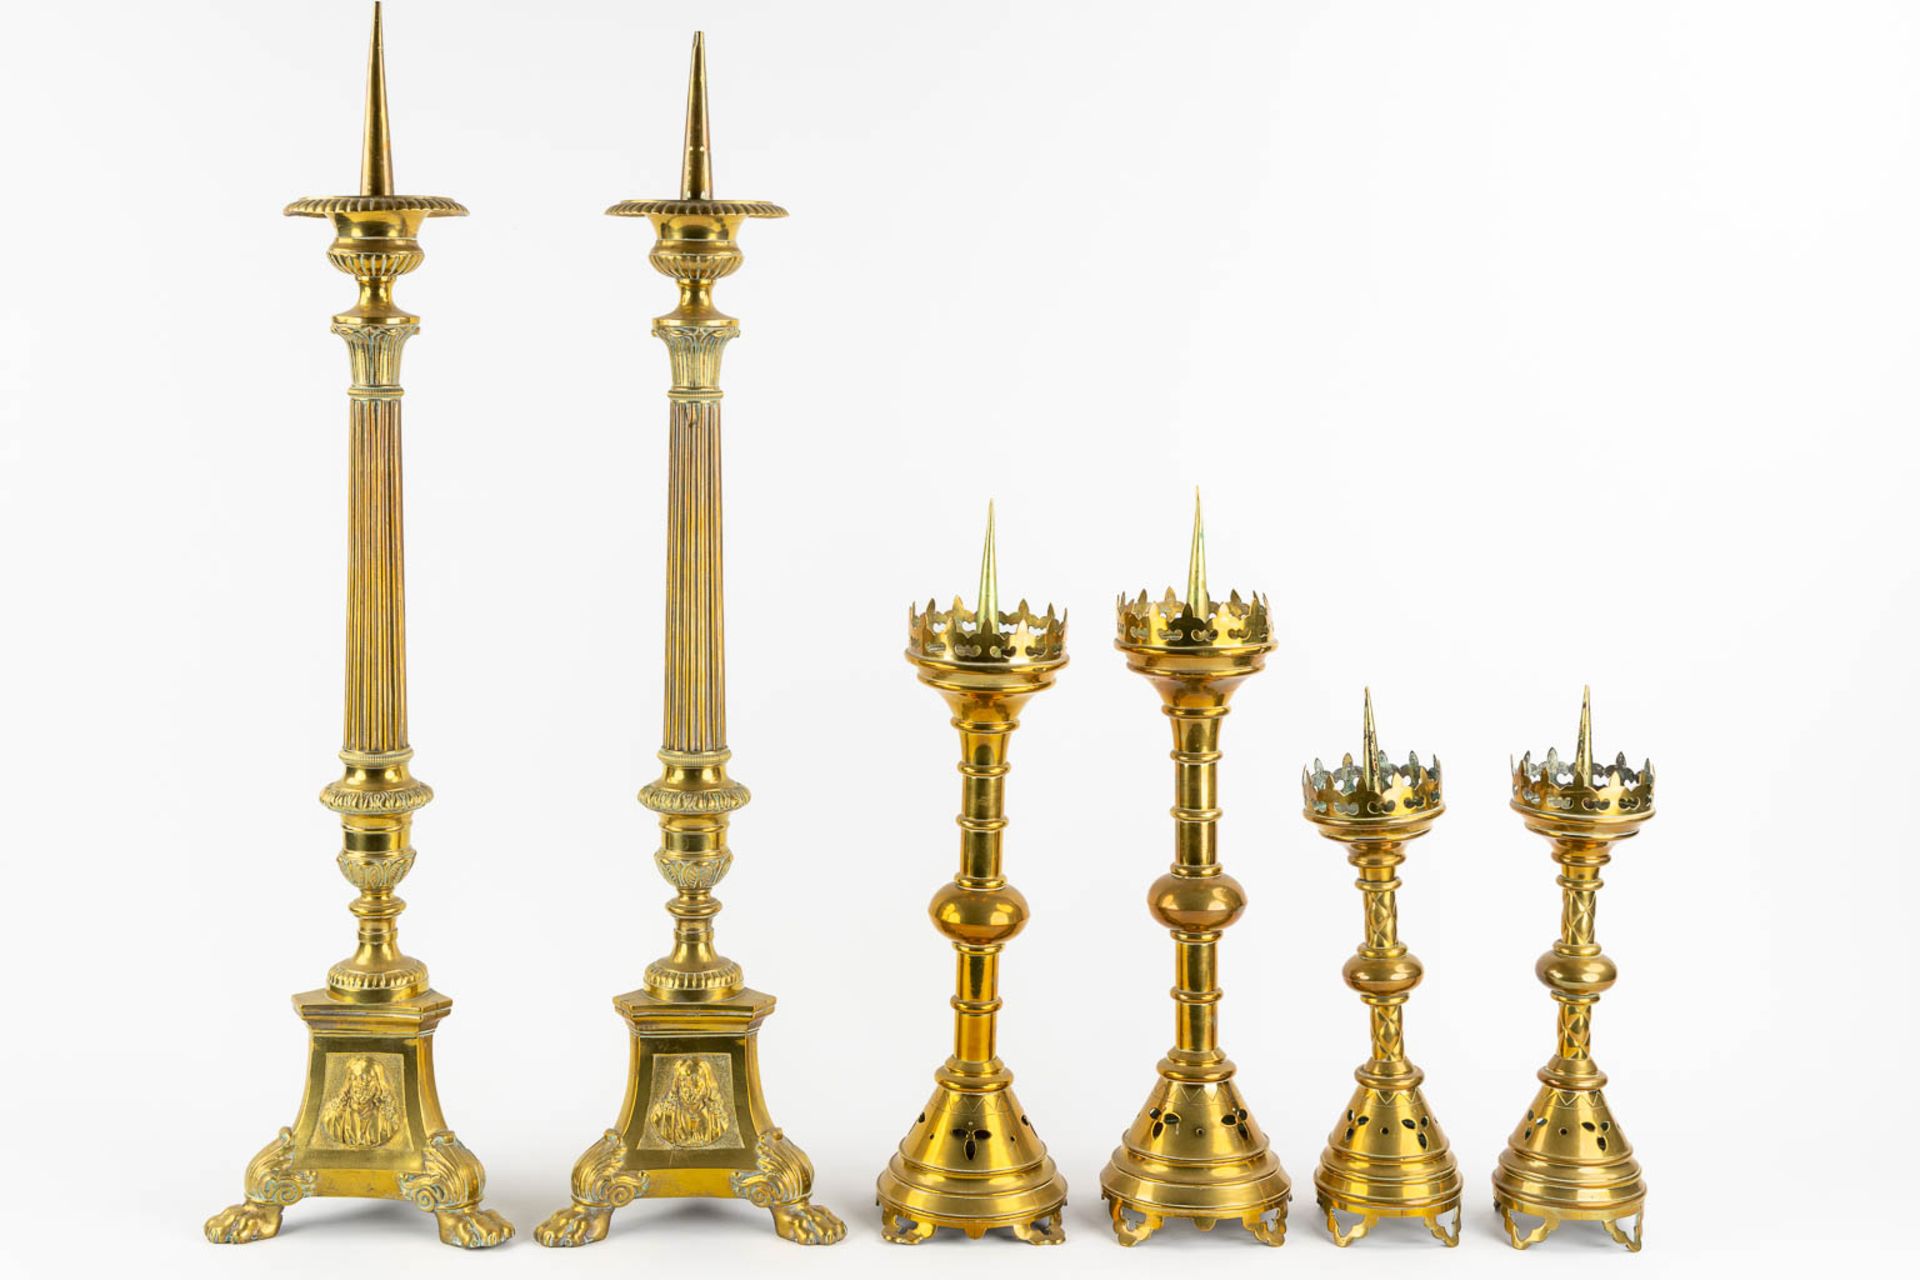 Three pairs of Church candlesticks, brass. Gothic Revival. (H:86 cm) - Image 5 of 16